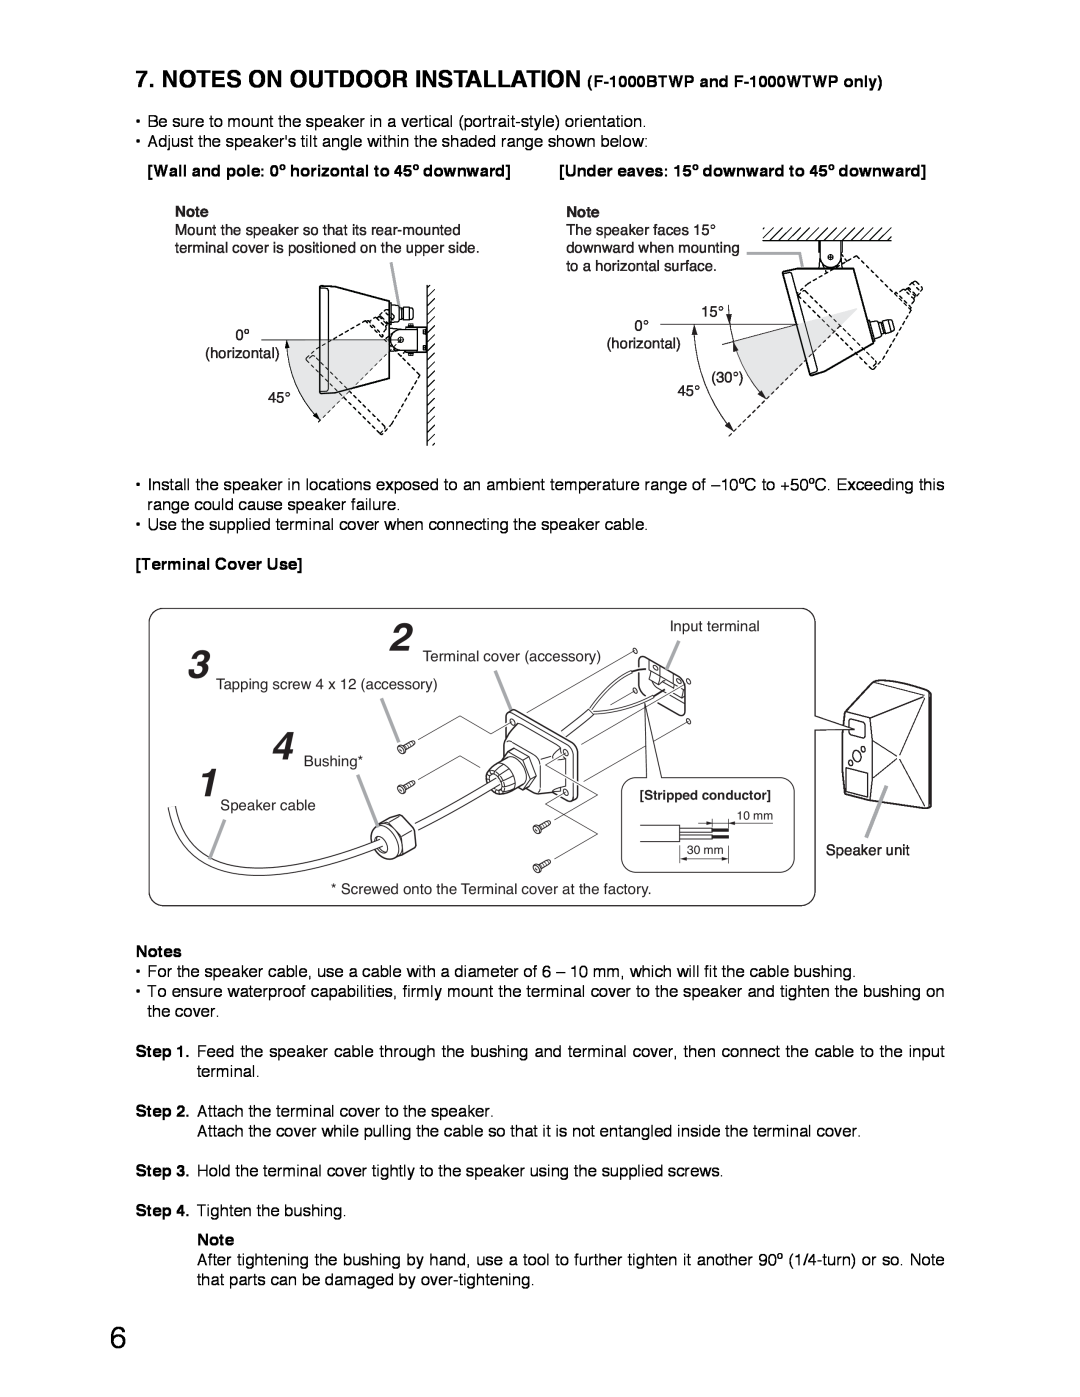 TOA Electronics operating instructions NOTES ON OUTDOOR INSTALLATION F-1000BTWP and F-1000WTWP only, Terminal Cover Use 